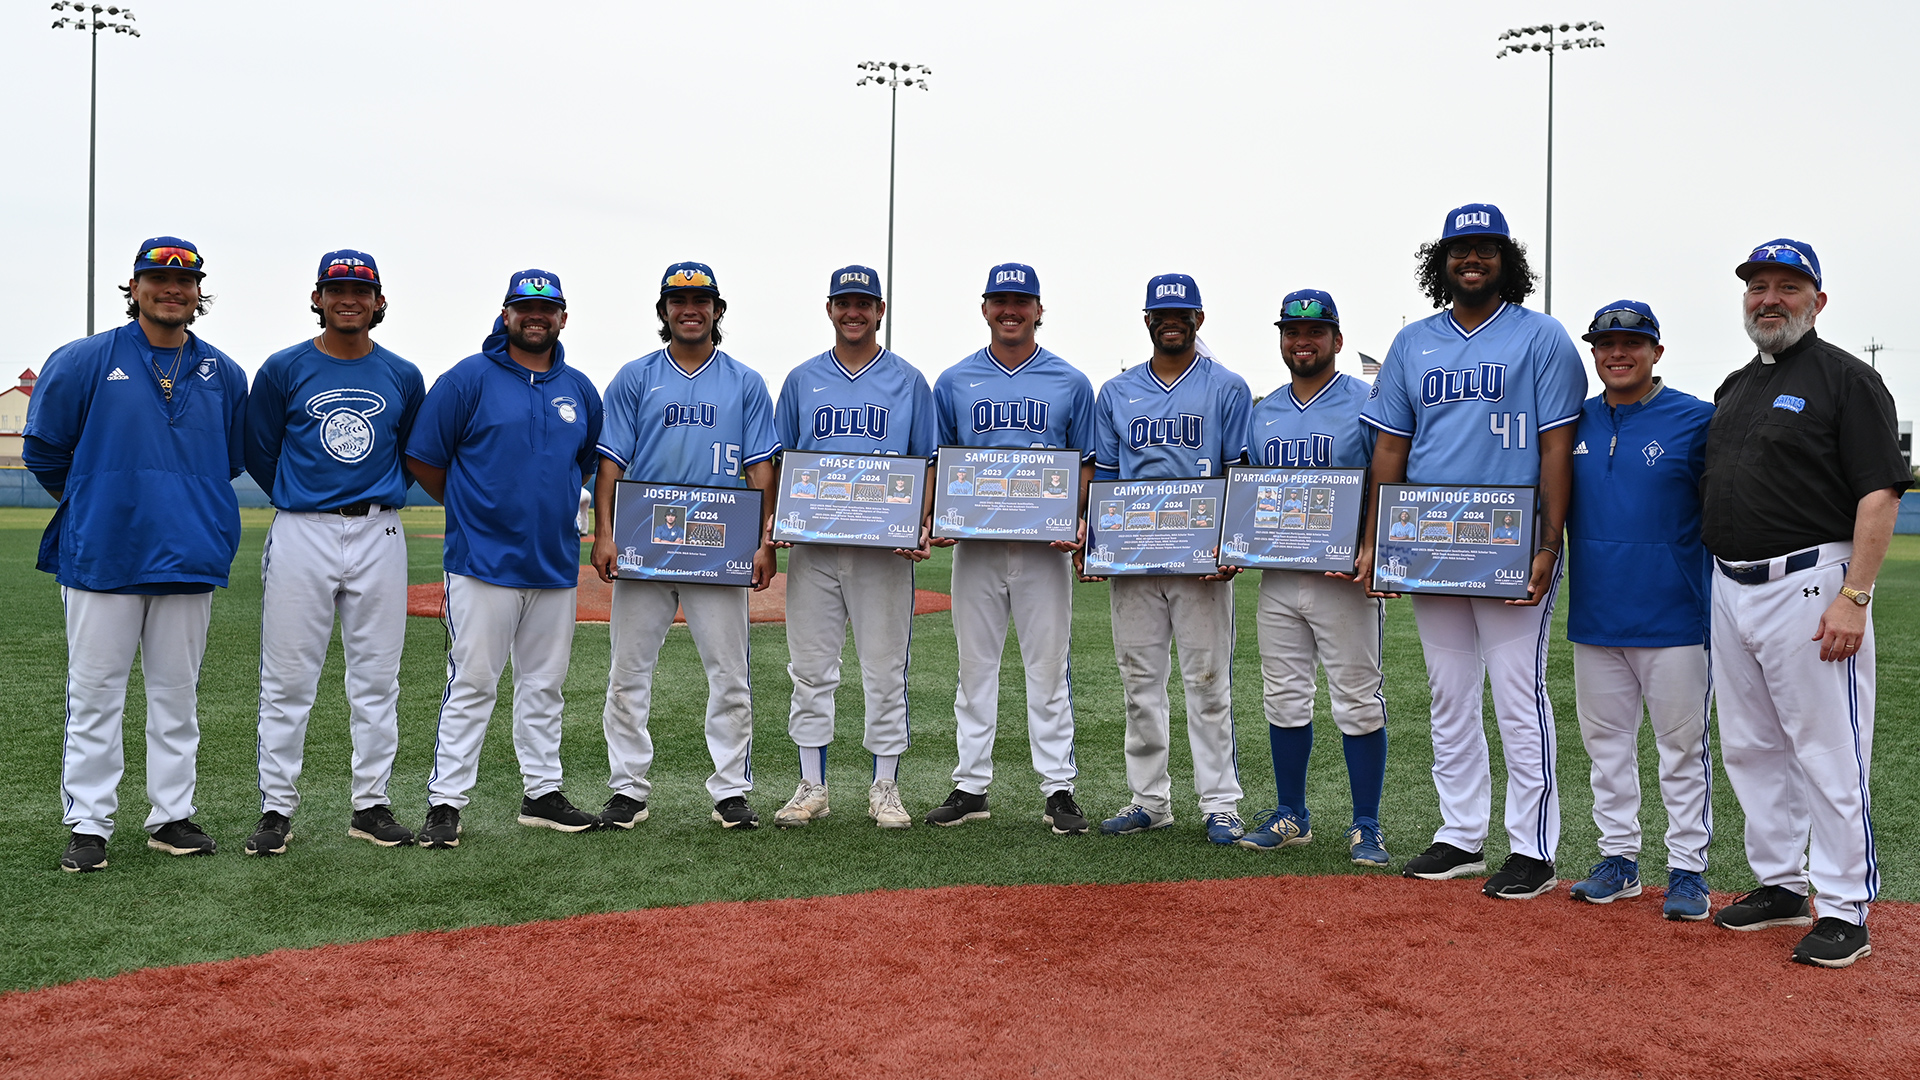 The Saints honored the senior class after the games. Pictured (l-r) are Joseph Medina, Chase Dunn, Samuel Brown, Caimyn Holiday, D'Artagnan Perez-Padron and Dominique Boggs.